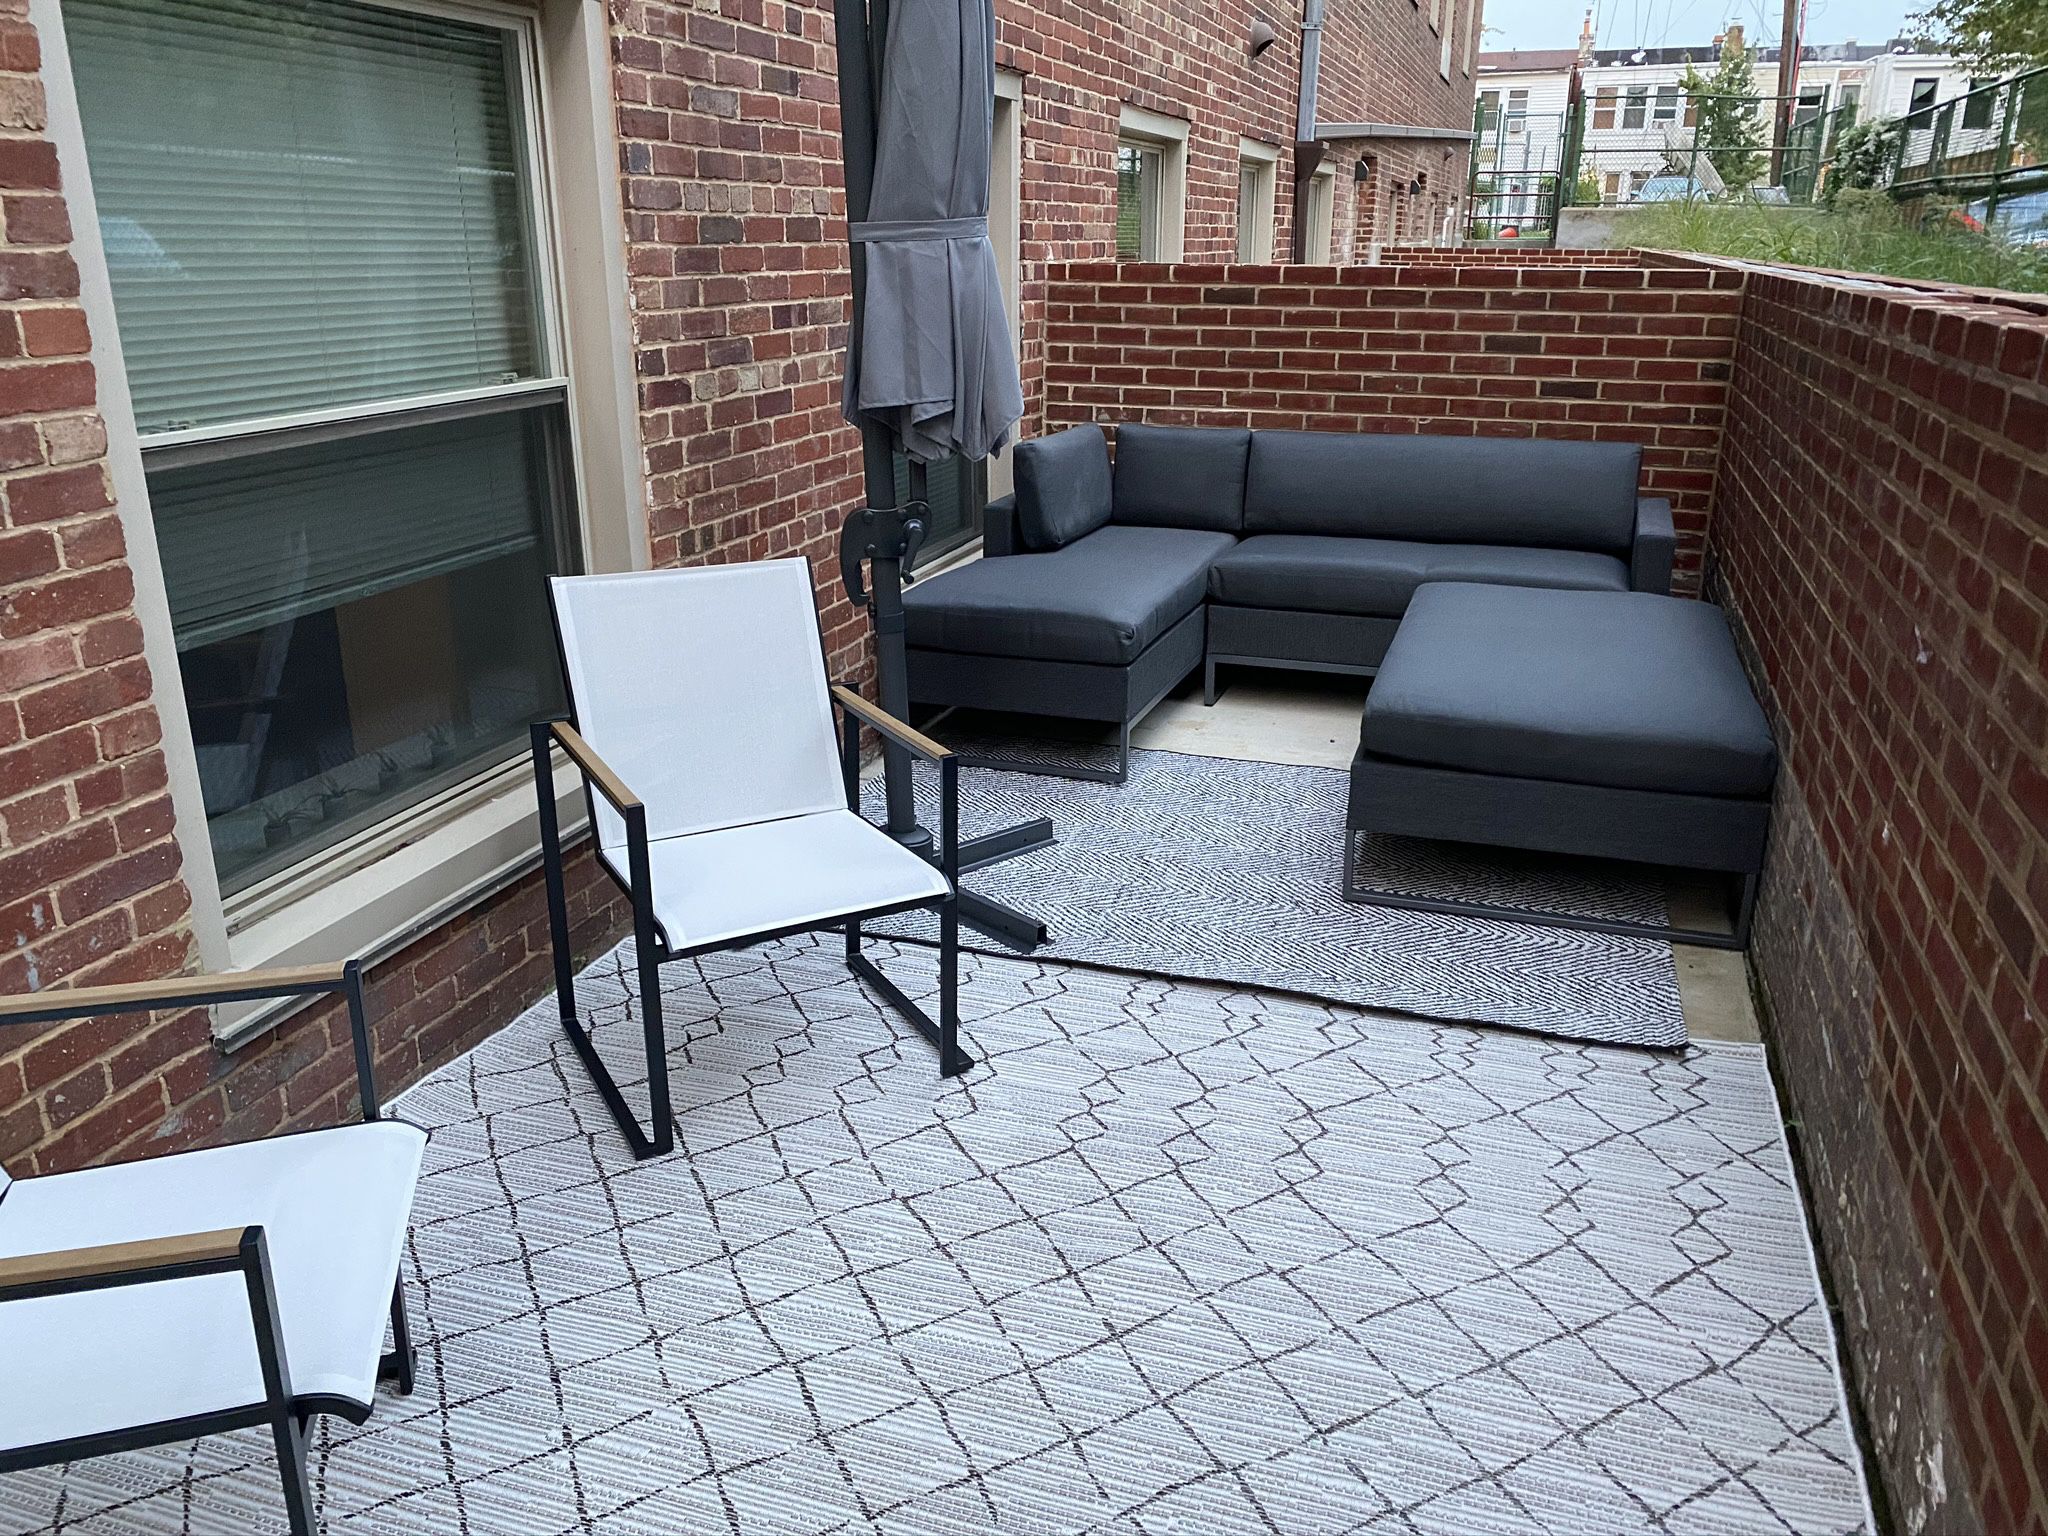 Full Patio Set (Sectional, Dining  Chairs, Ottoman, 2 Umbrellas, Rugs)